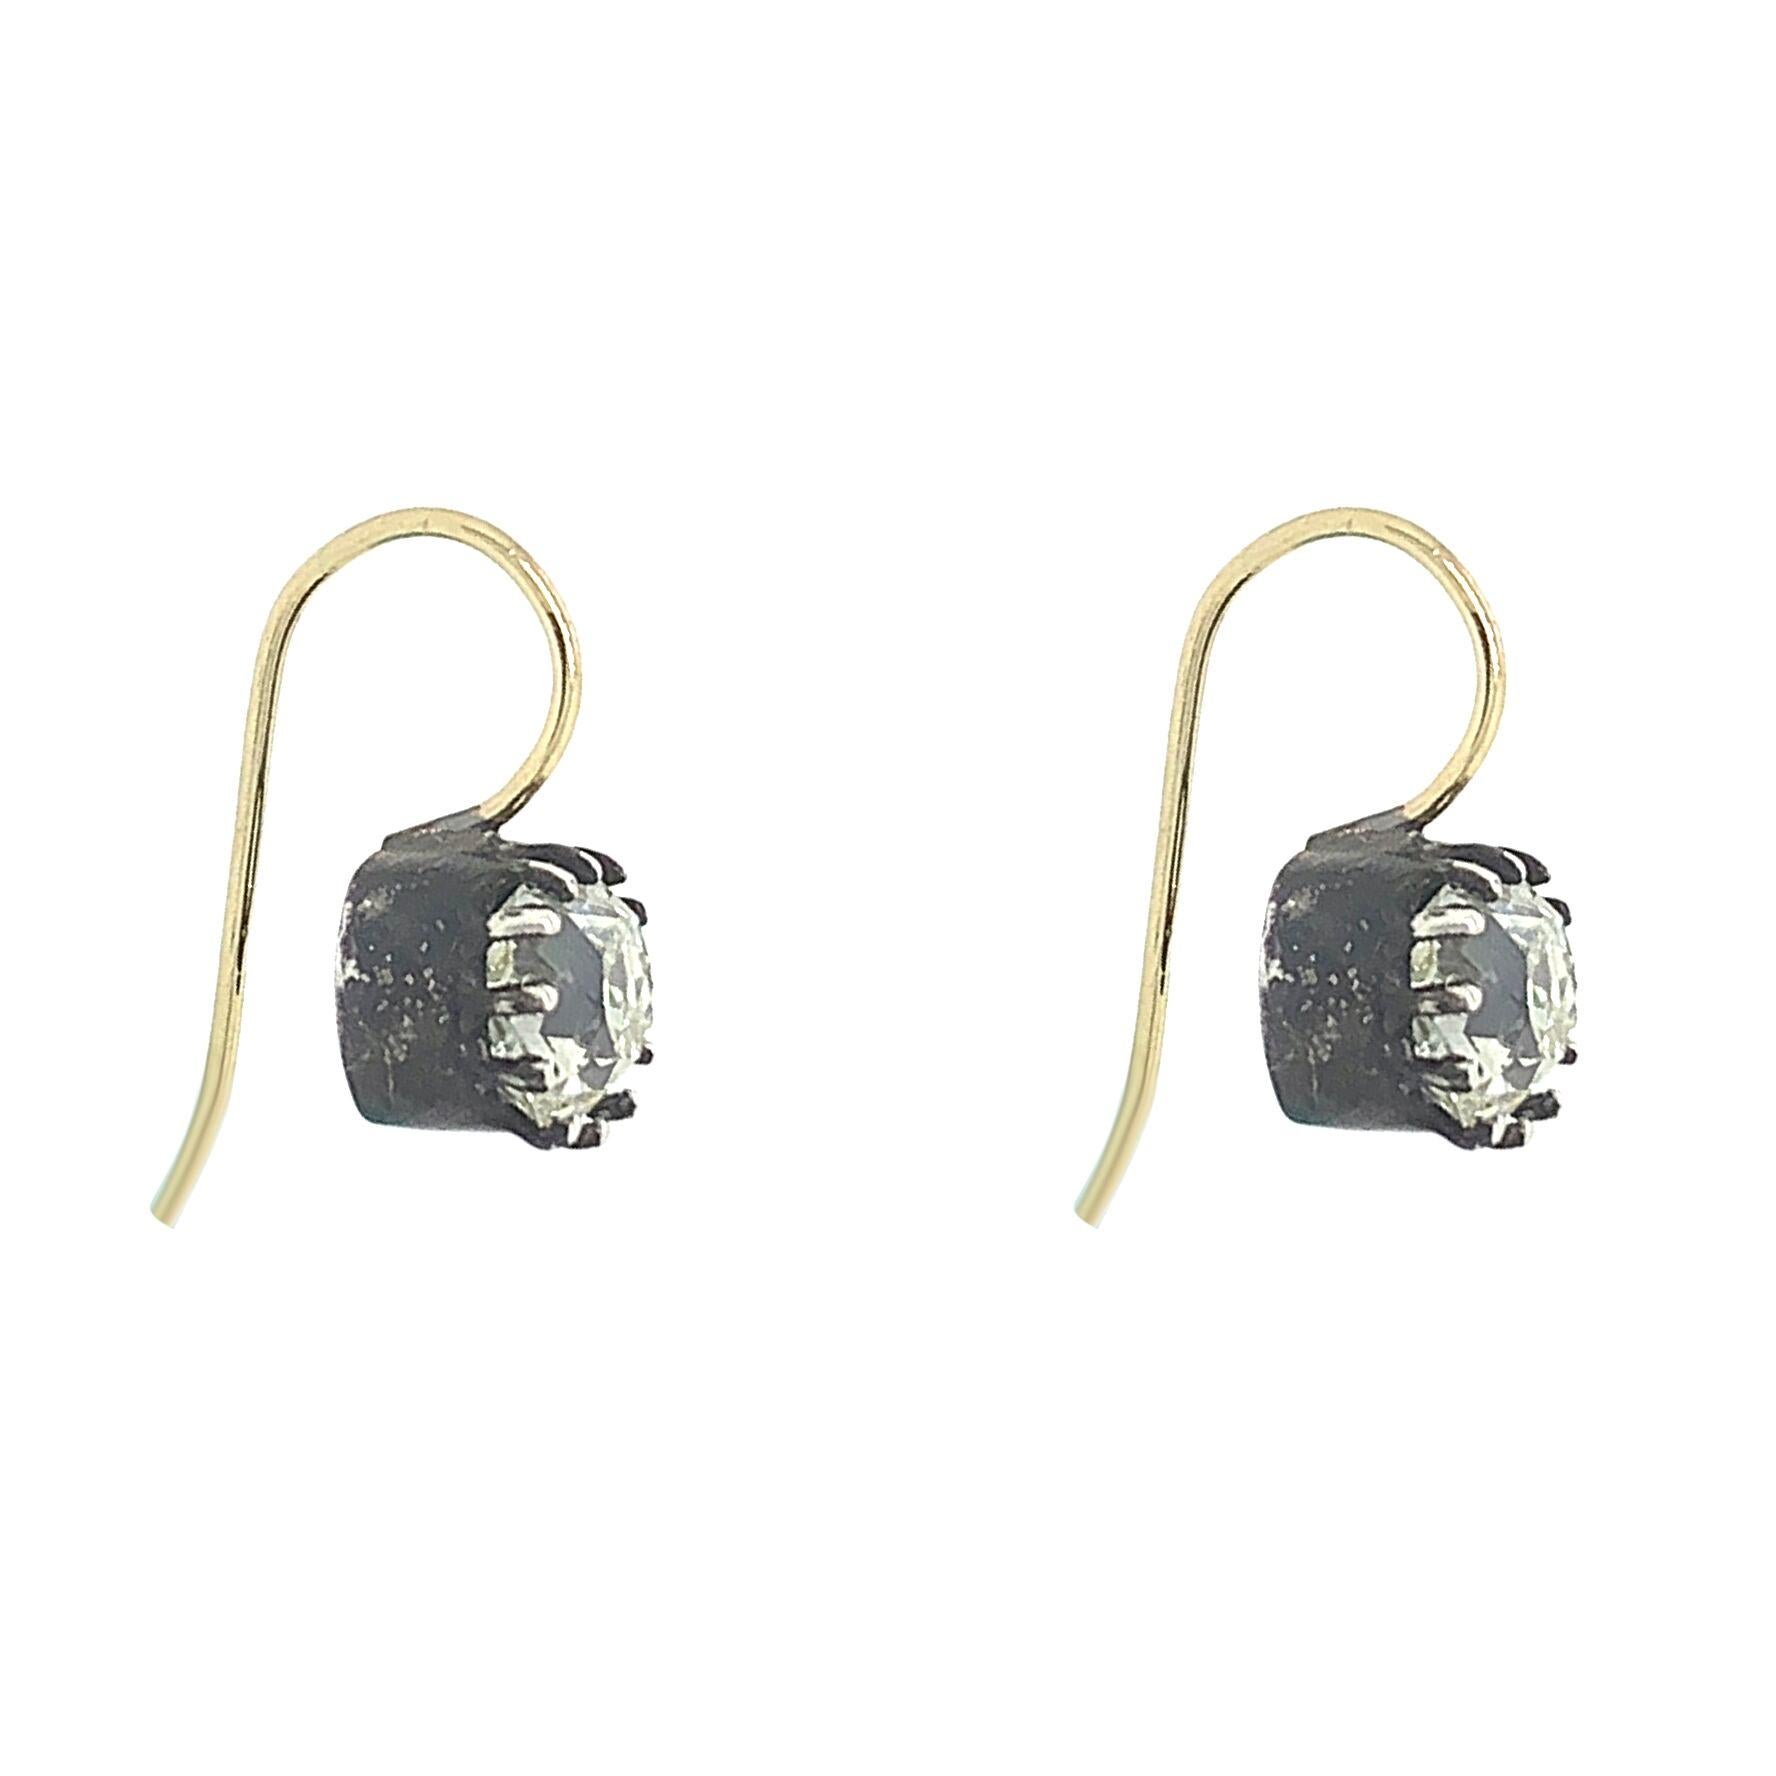 Antique Silver and Gold Diamond Earrings In Excellent Condition For Sale In New York, NY